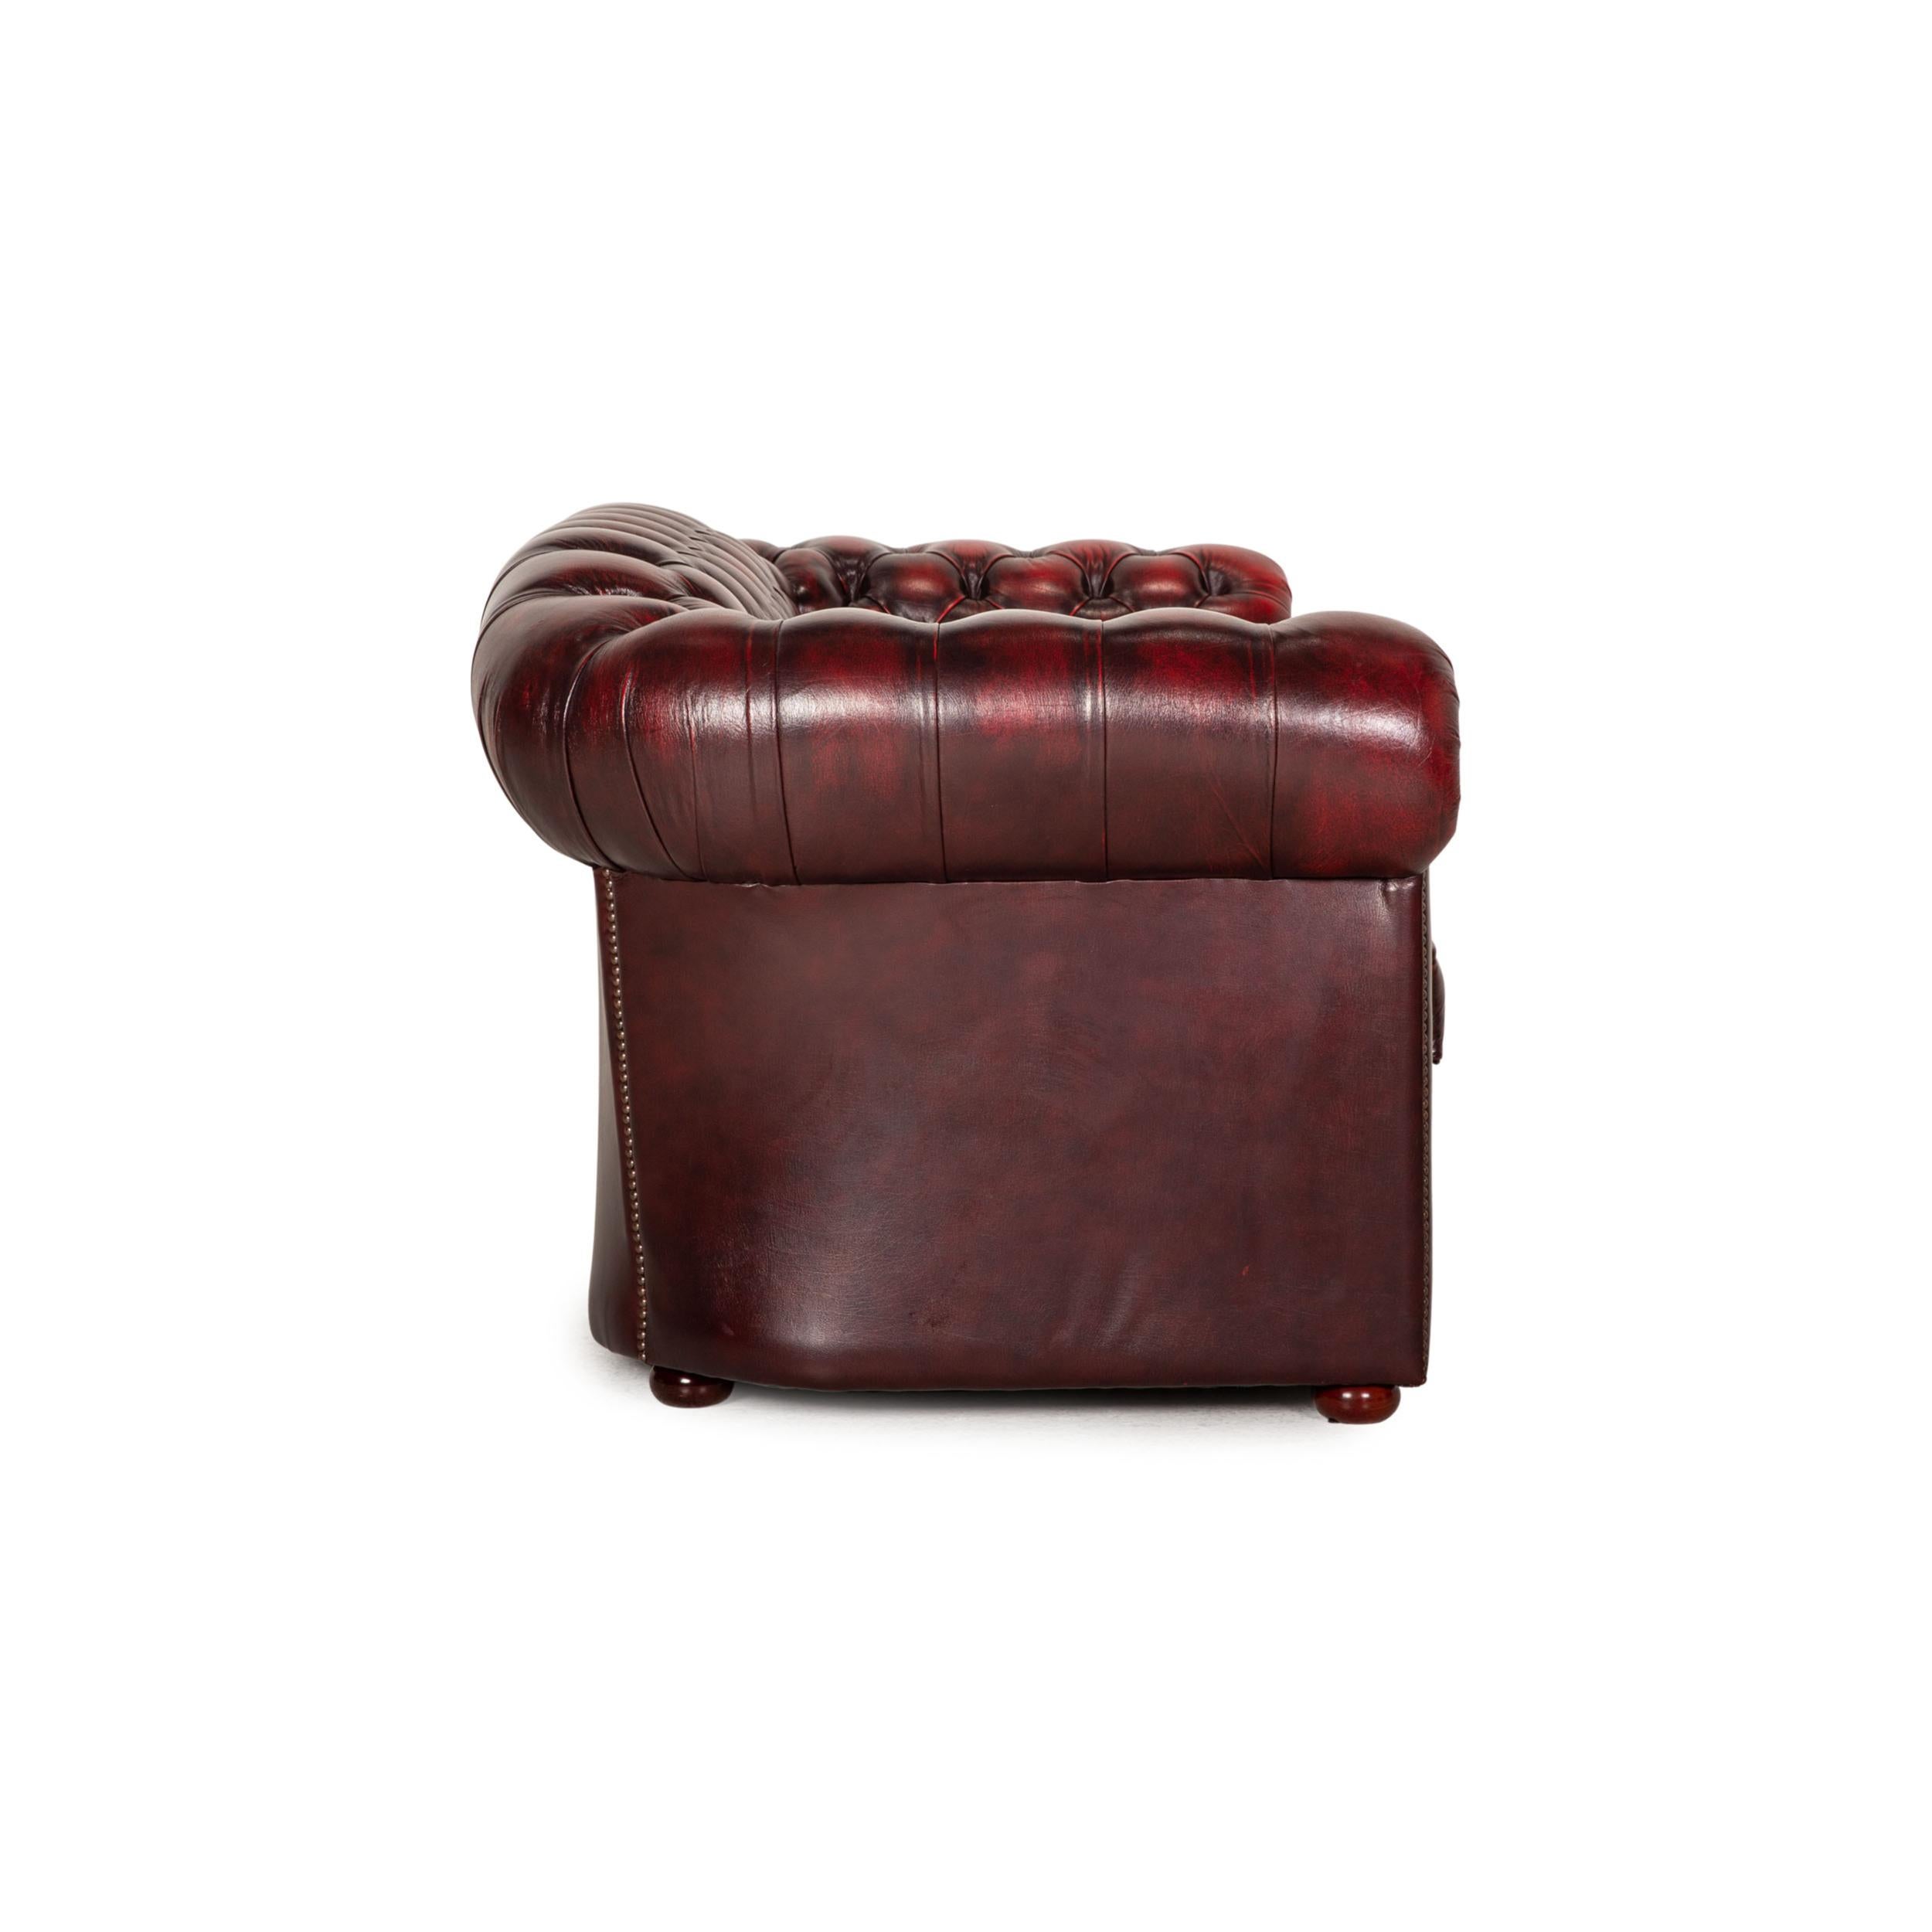 Chesterfield Tudor Leather Sofa Dark Red Two Seater Couch 1